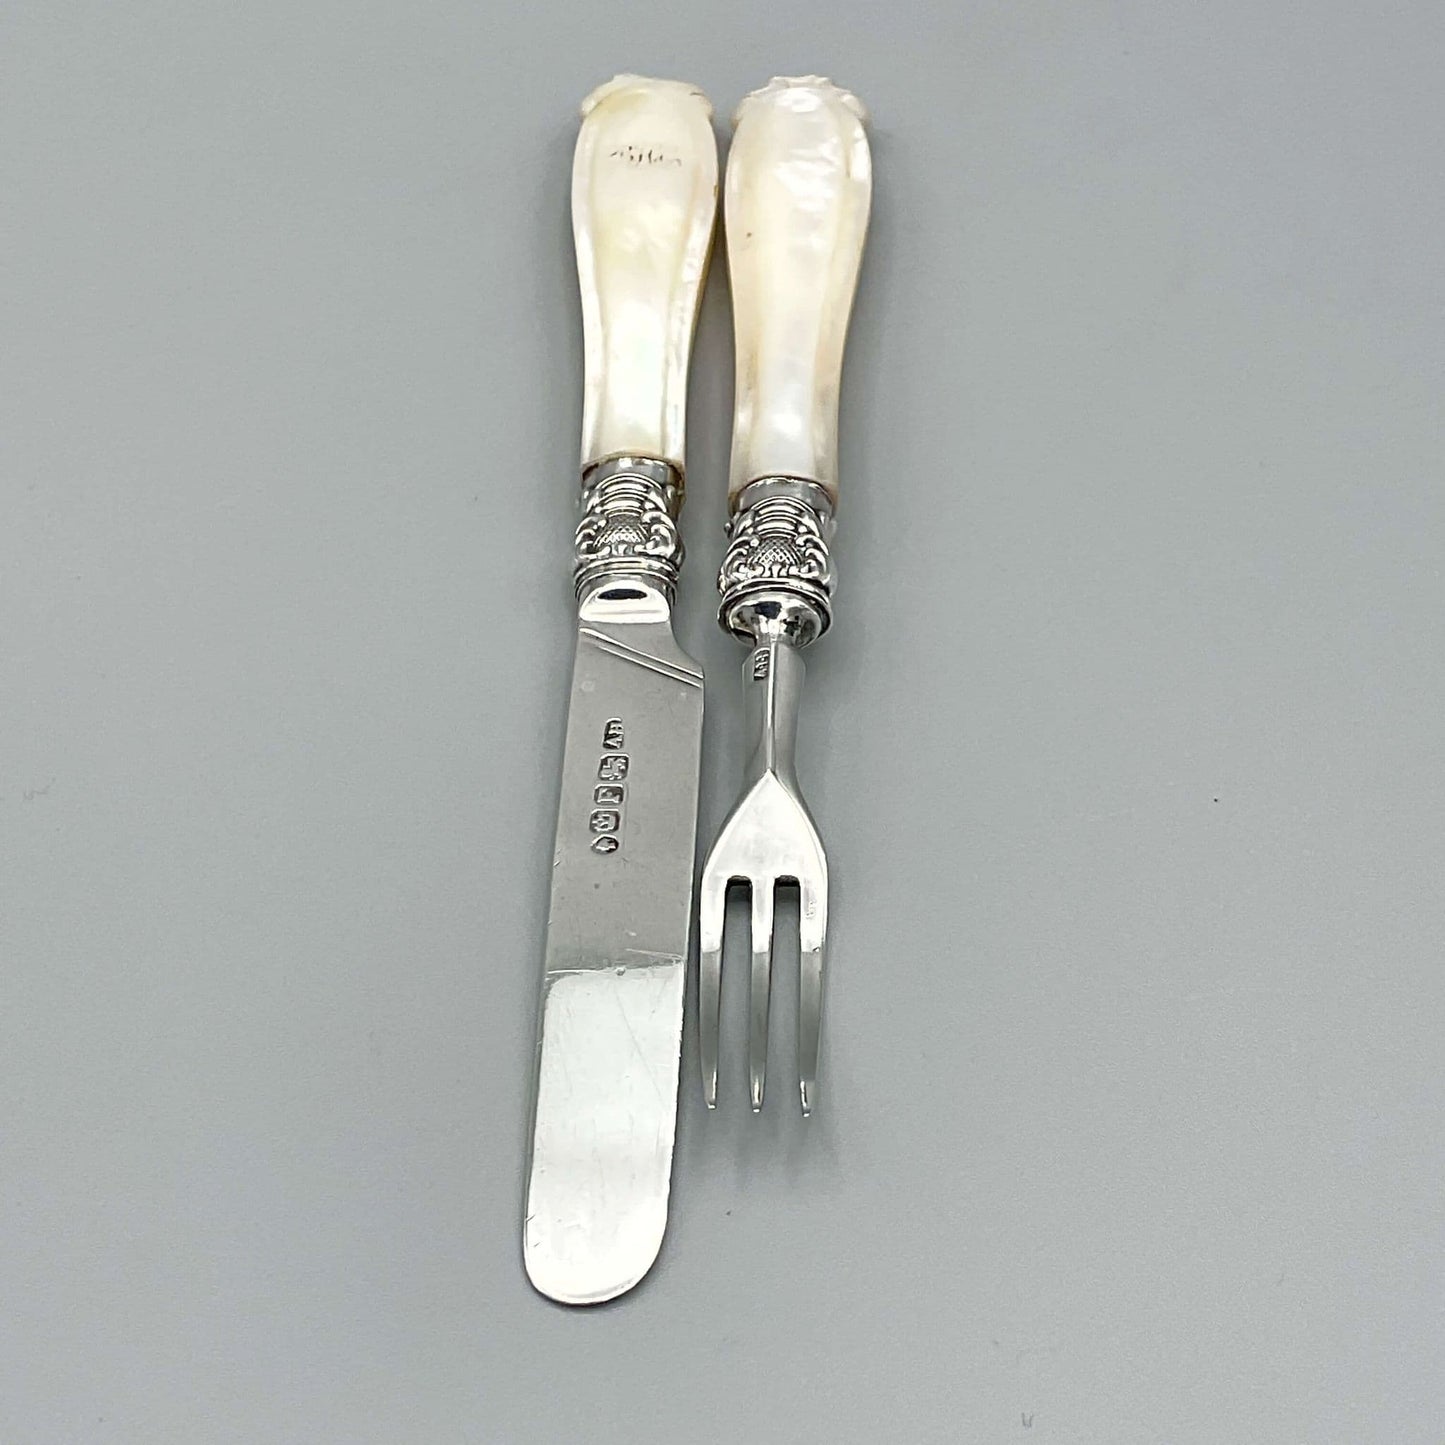 Antique Silver Knife and Fork, Victorian 1849 Hallmark, Travelling Cutlery,  Sterling Silver Blade, Mother of Pearl Handle, Campaign Cutlery 